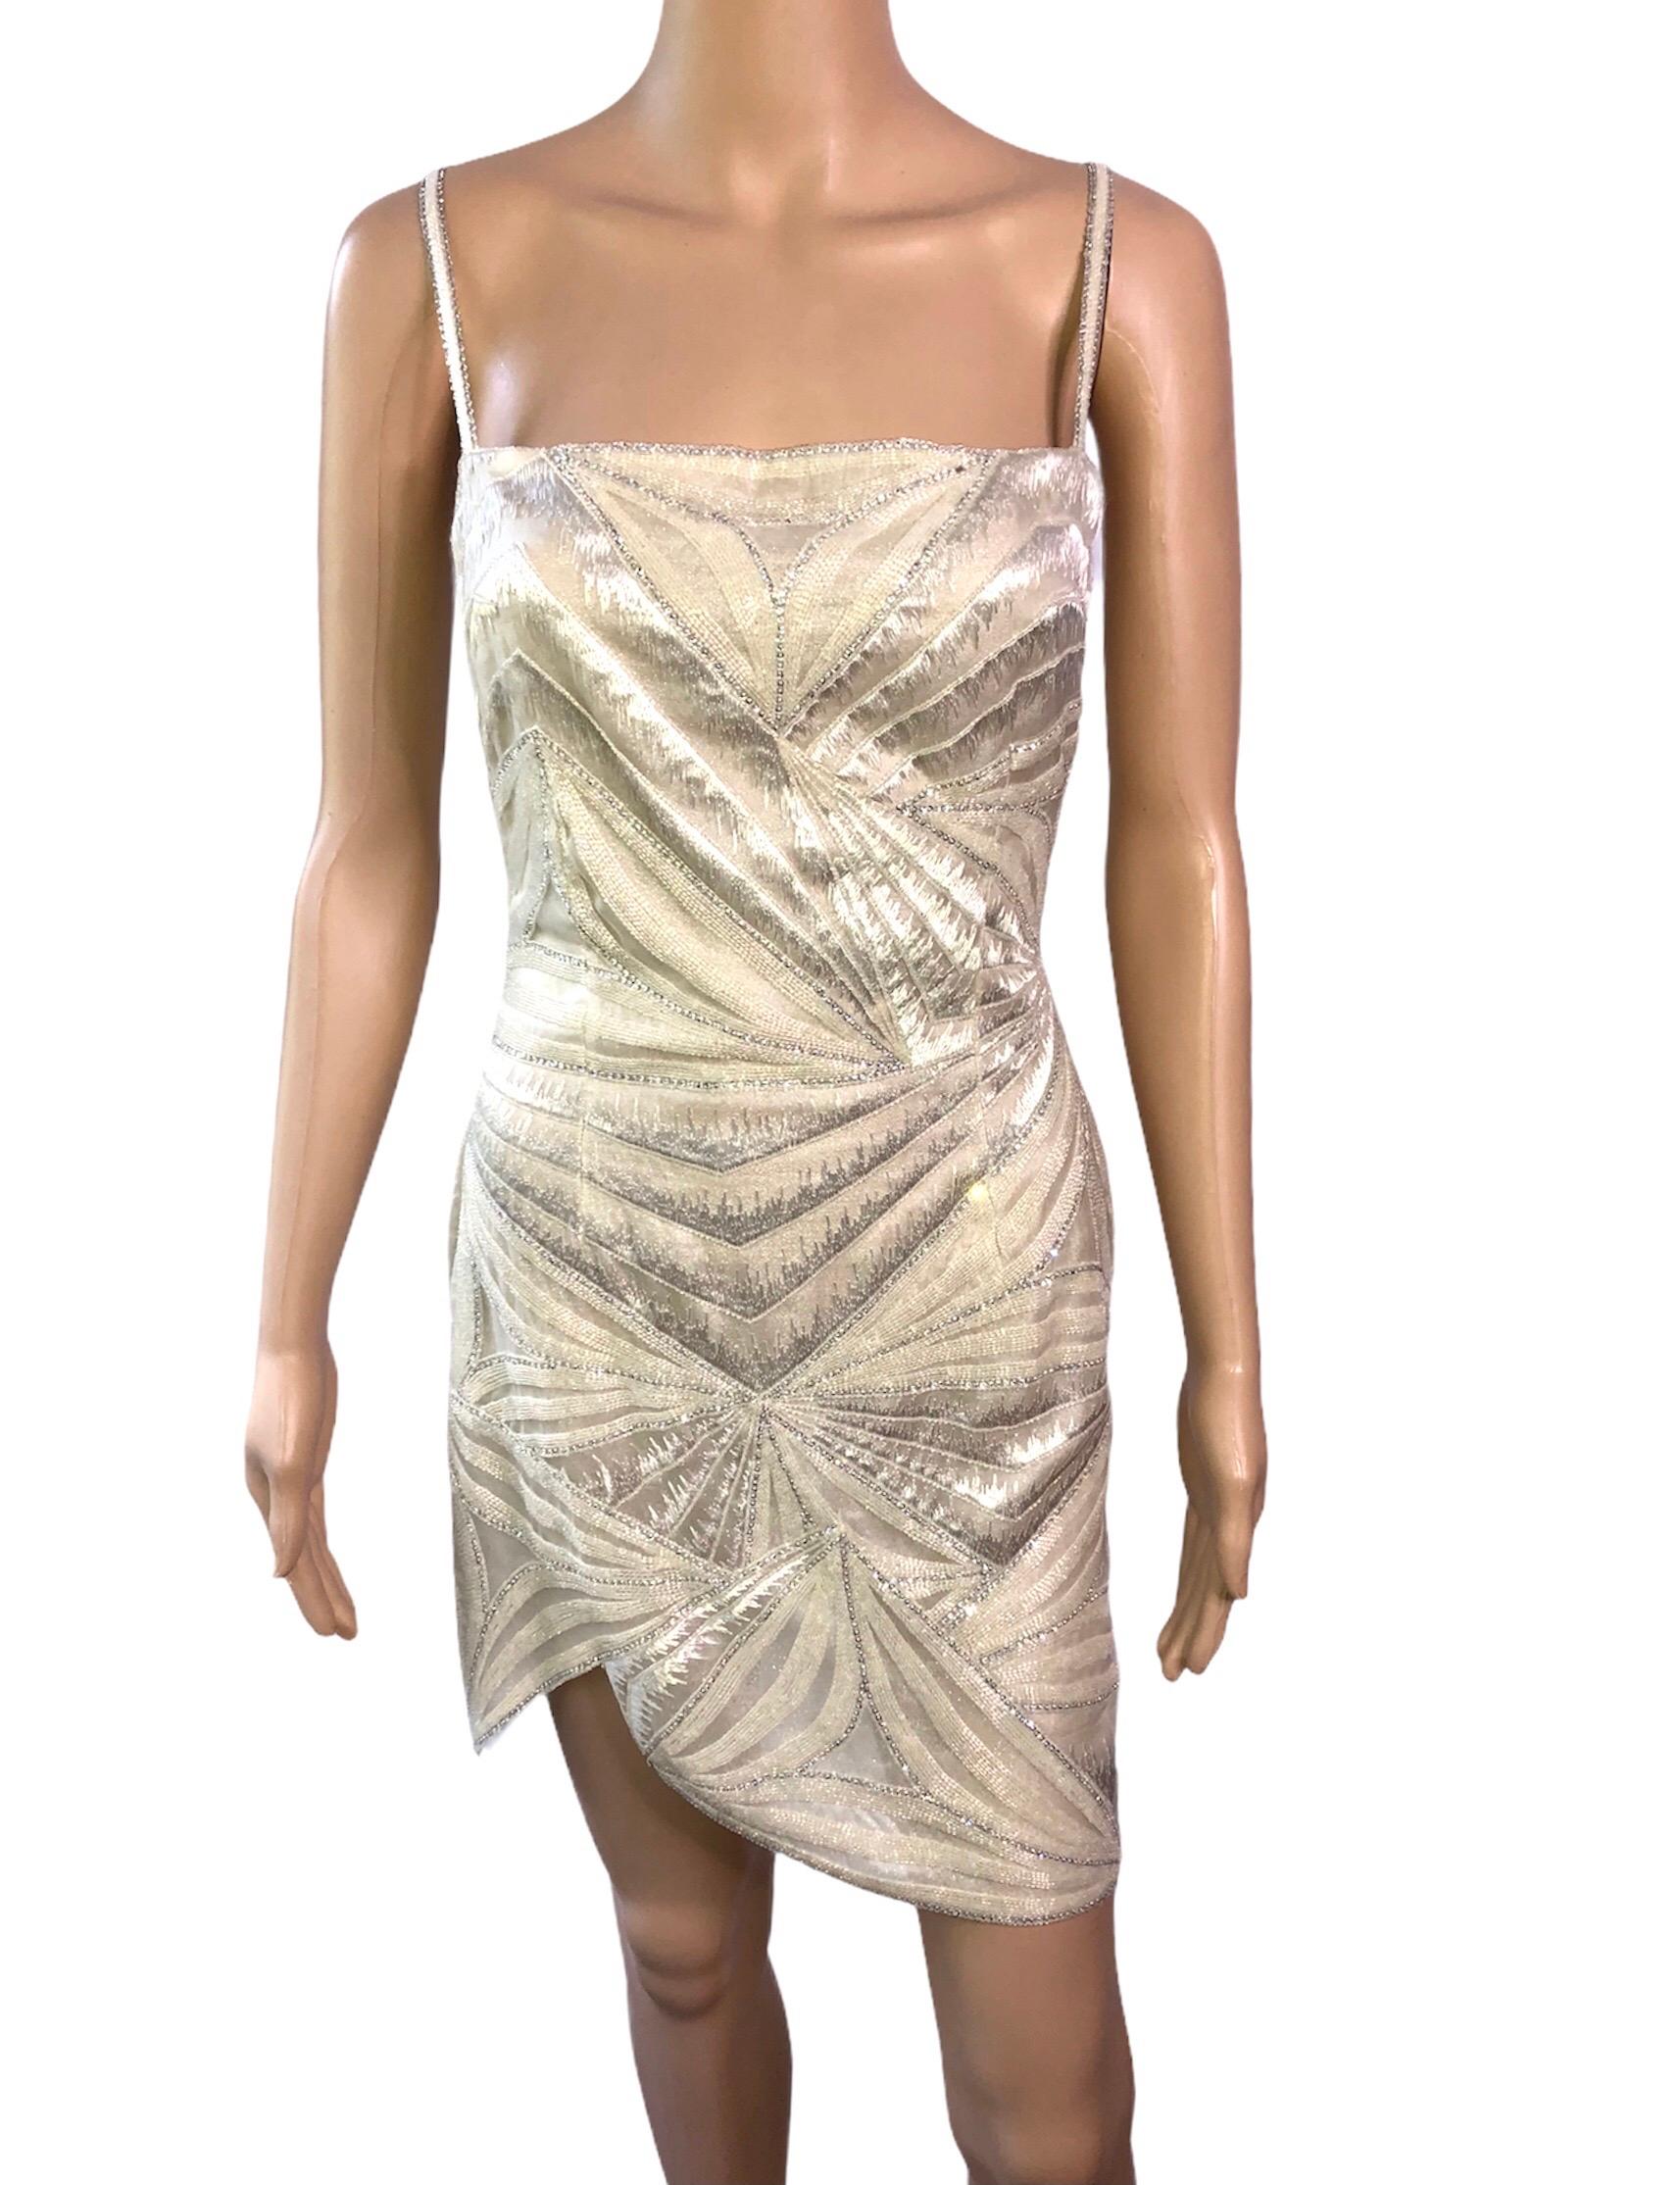 Atelier Versace by Gianni Versace Haute Couture F/W 1998 Embellished Sheer Cutout Mini Dress IT 42

Atelier Versace sleeveless mini dress featuring bead and rhinestone embellishments, tiered hem and concealed zip closure at back. 


